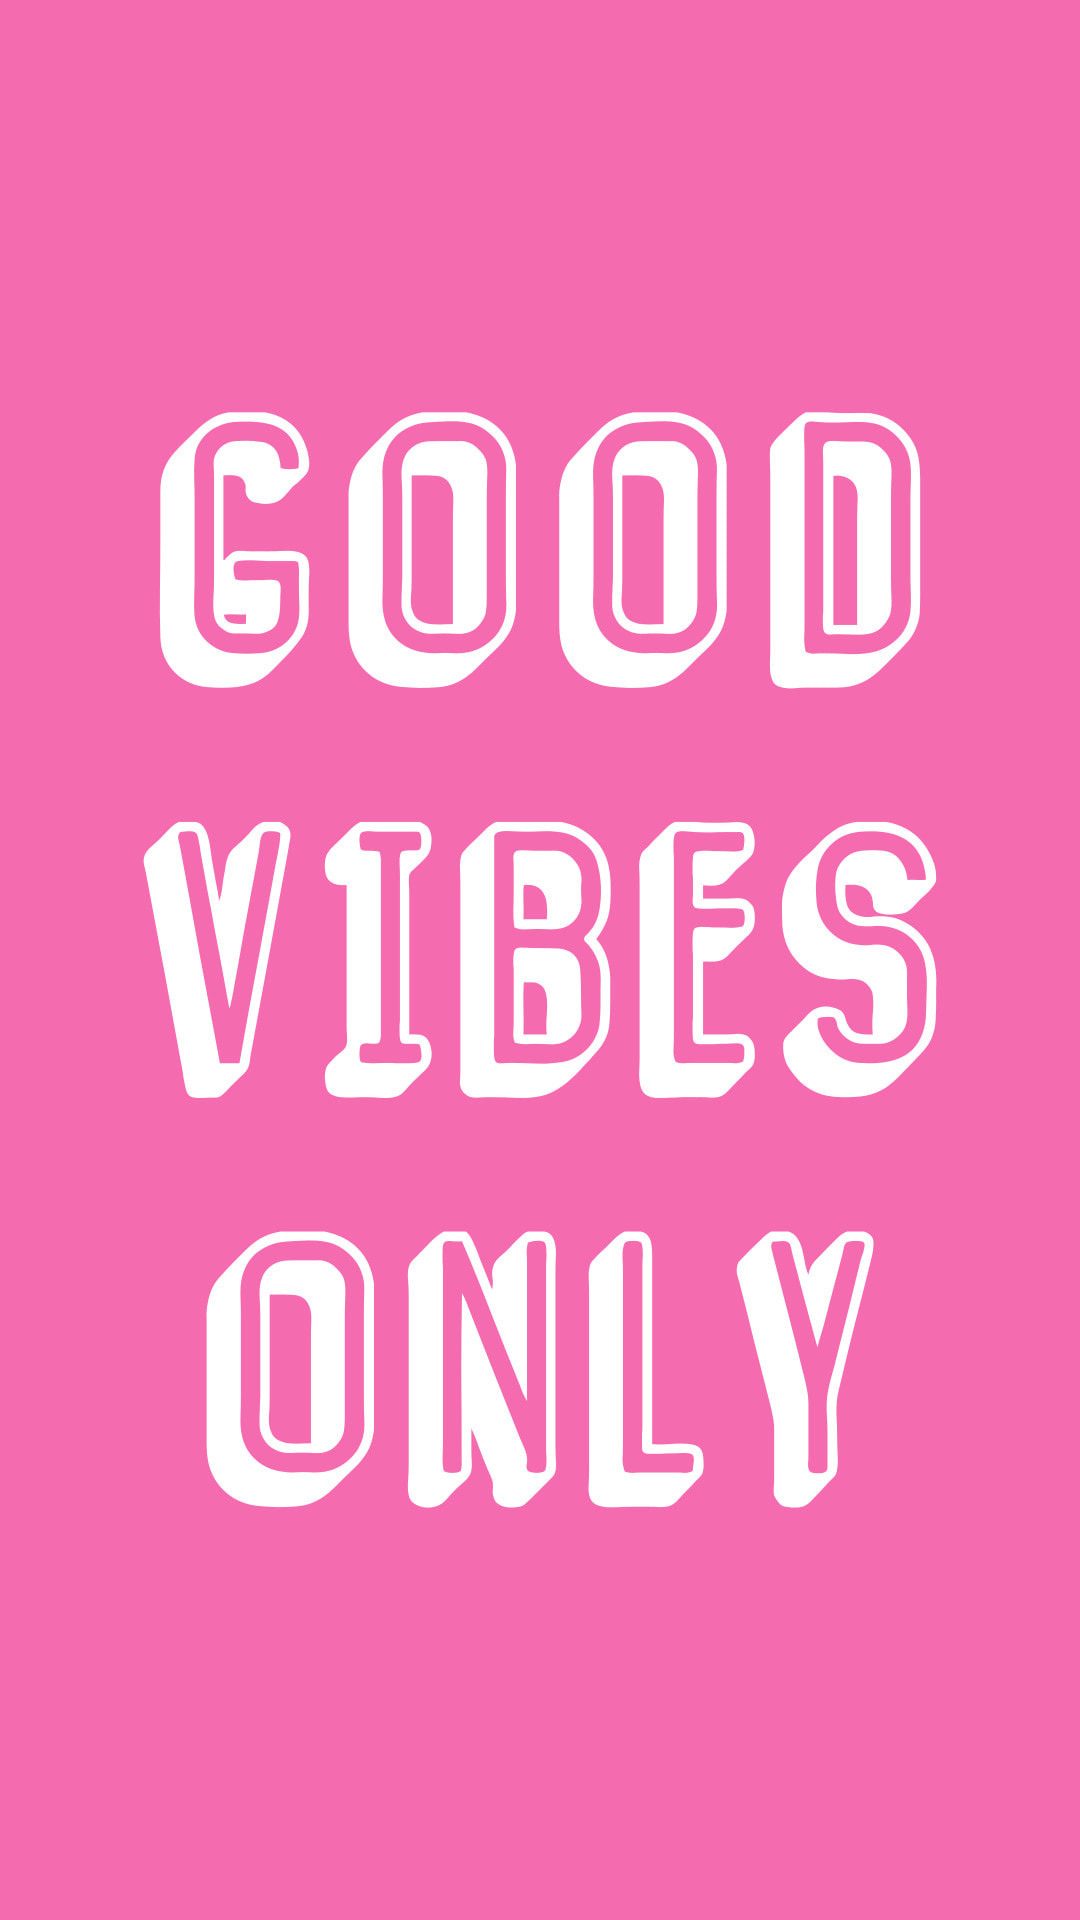 Good vibes only text wallpaper Royalty Free Vector Image